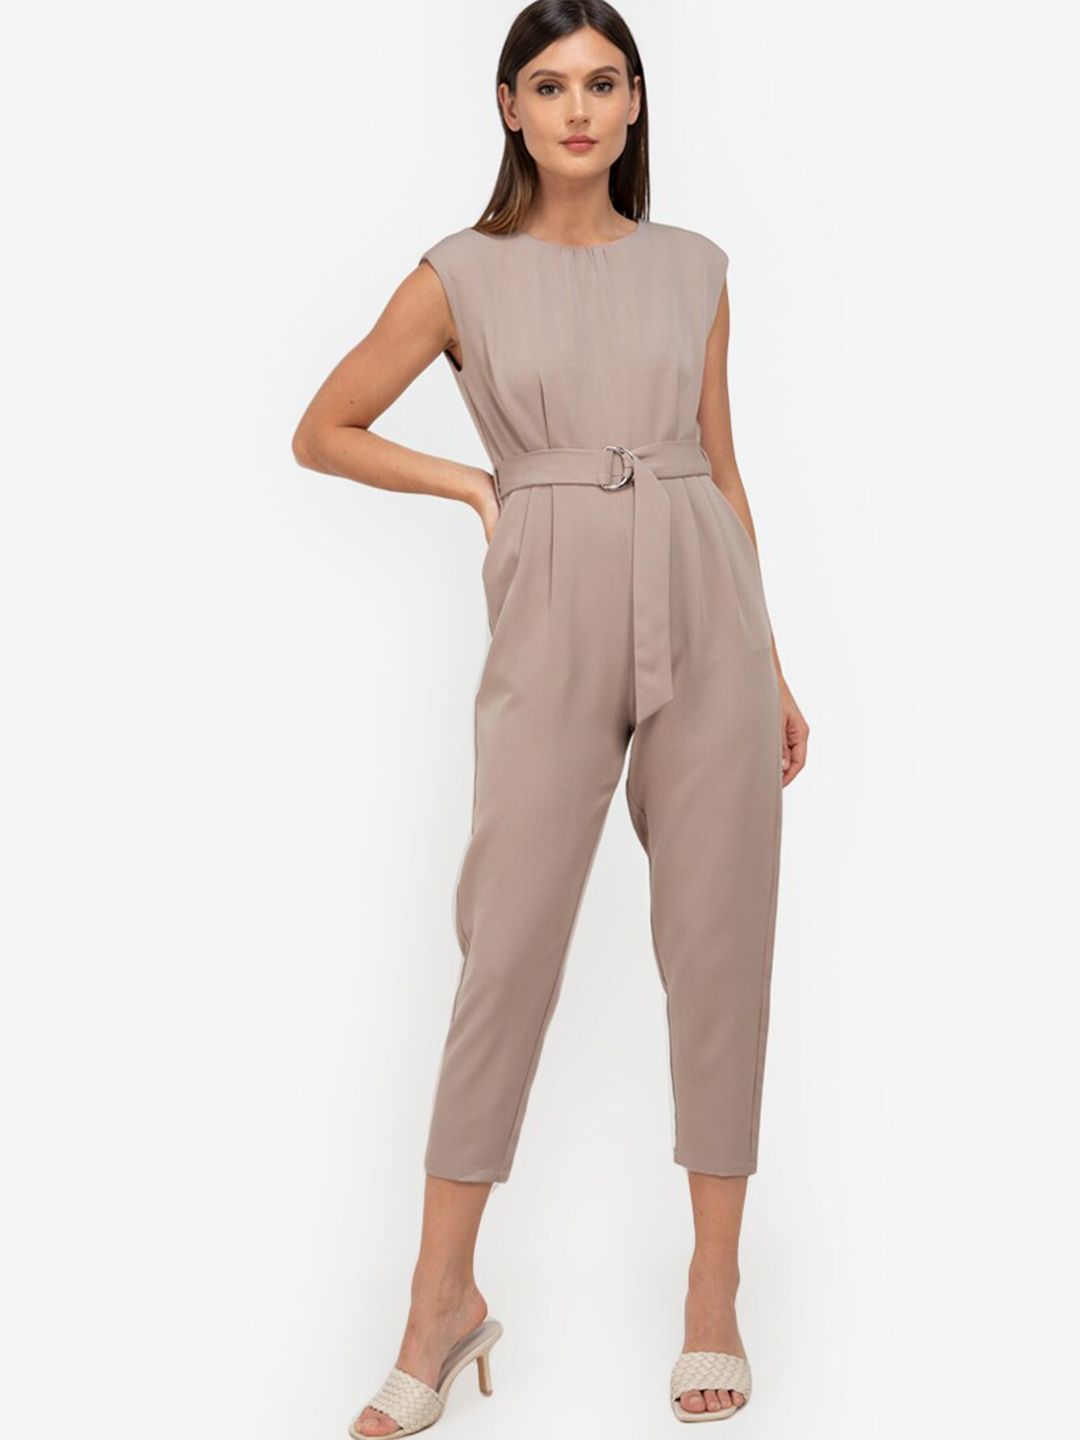 ZALORA WORK Brown Solid Jumpsuit with Belt Price in India